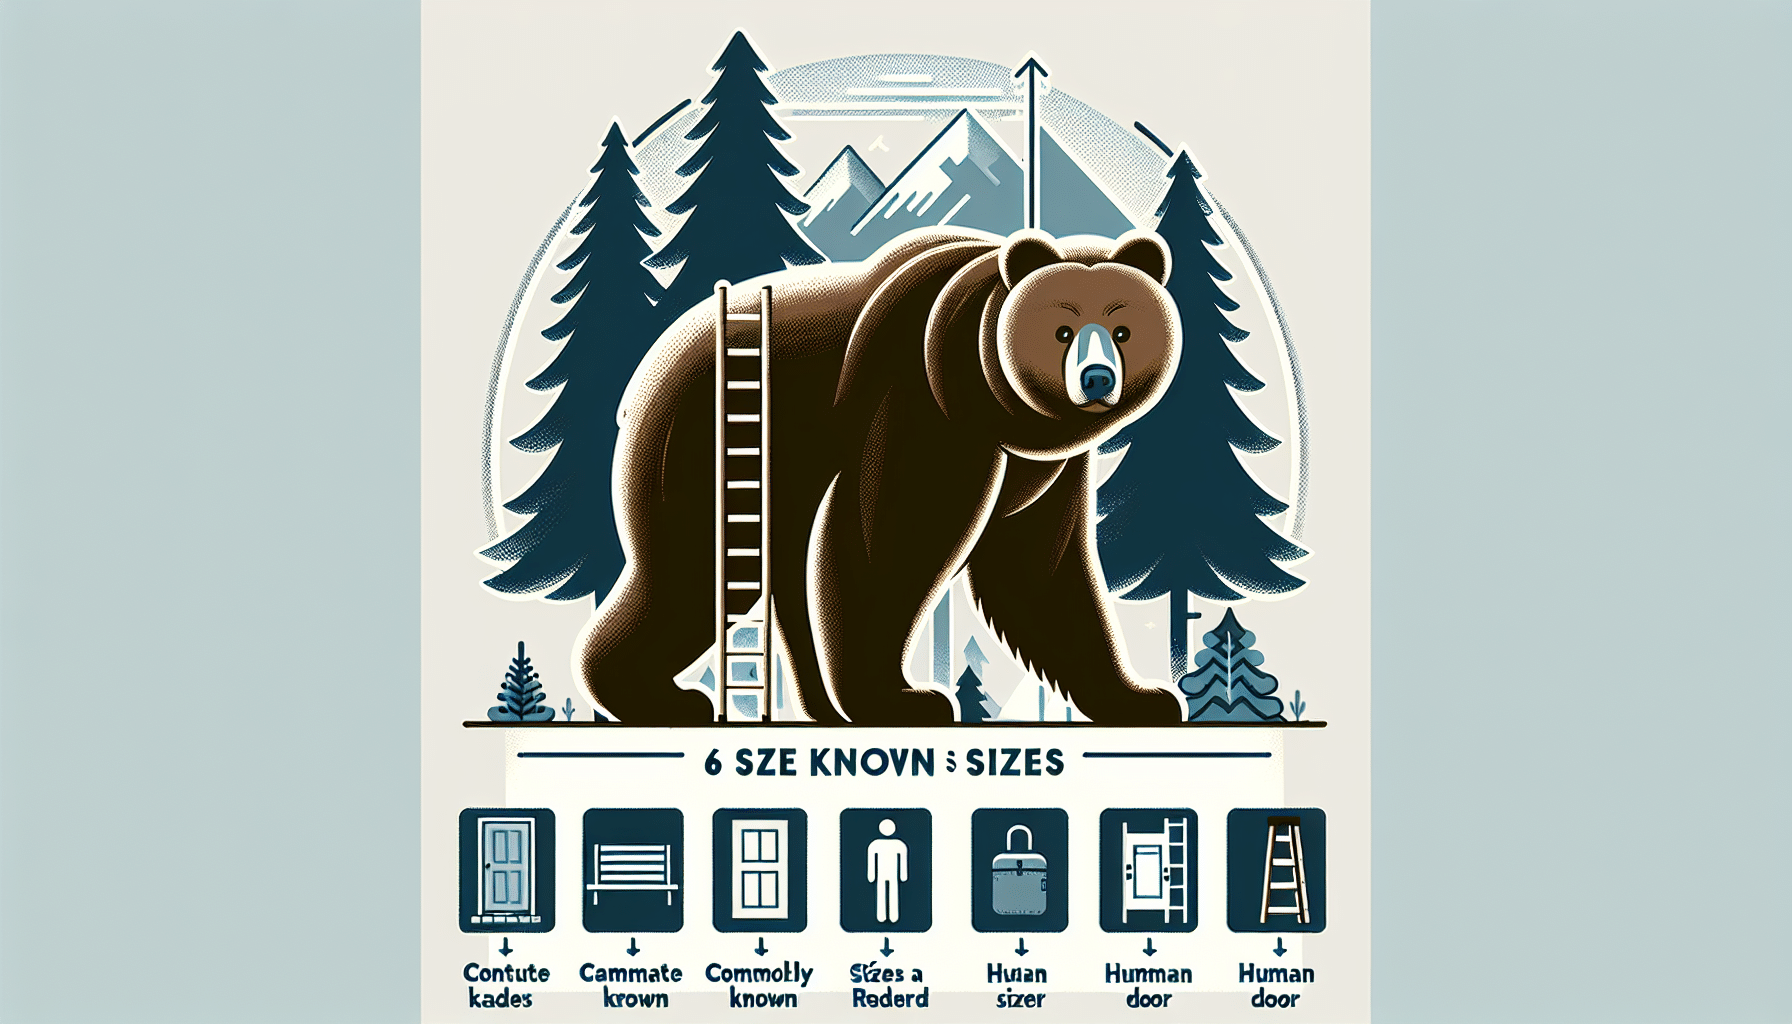 An informative illustration of a brown bear in its natural habitat. The bear is standing next to pine trees with mountains in the background, which can give a size perspective. Next to the bear, without breaking its natural setting, are objects that are commonly known sizes for reference, such as a six-foot ladder and a human-sized door. Avoid including any text, brand names, or people in the image.